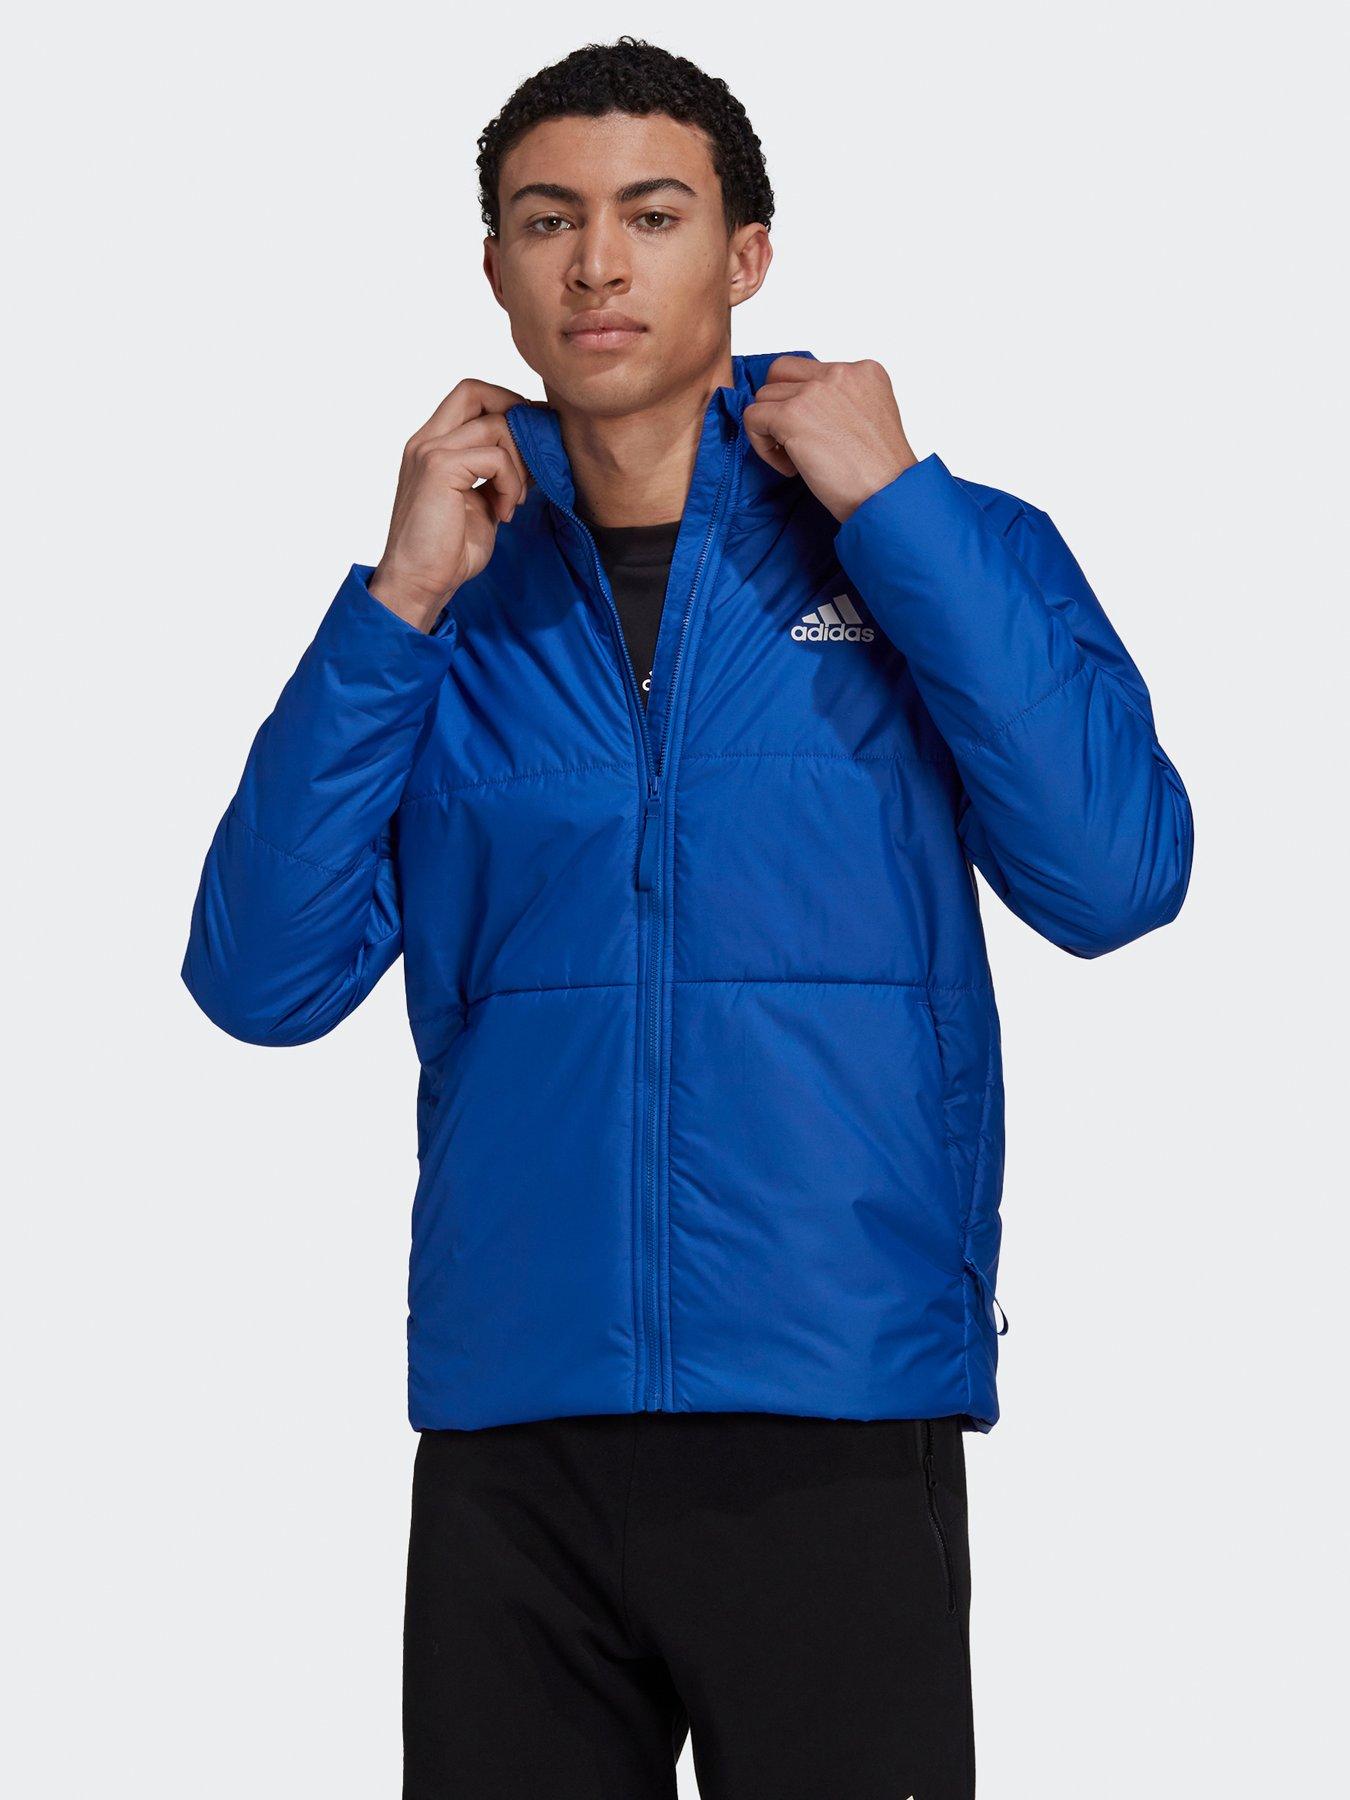 For All the people adidas Bsc 3-stripes Insulated Jacket fashionable ...